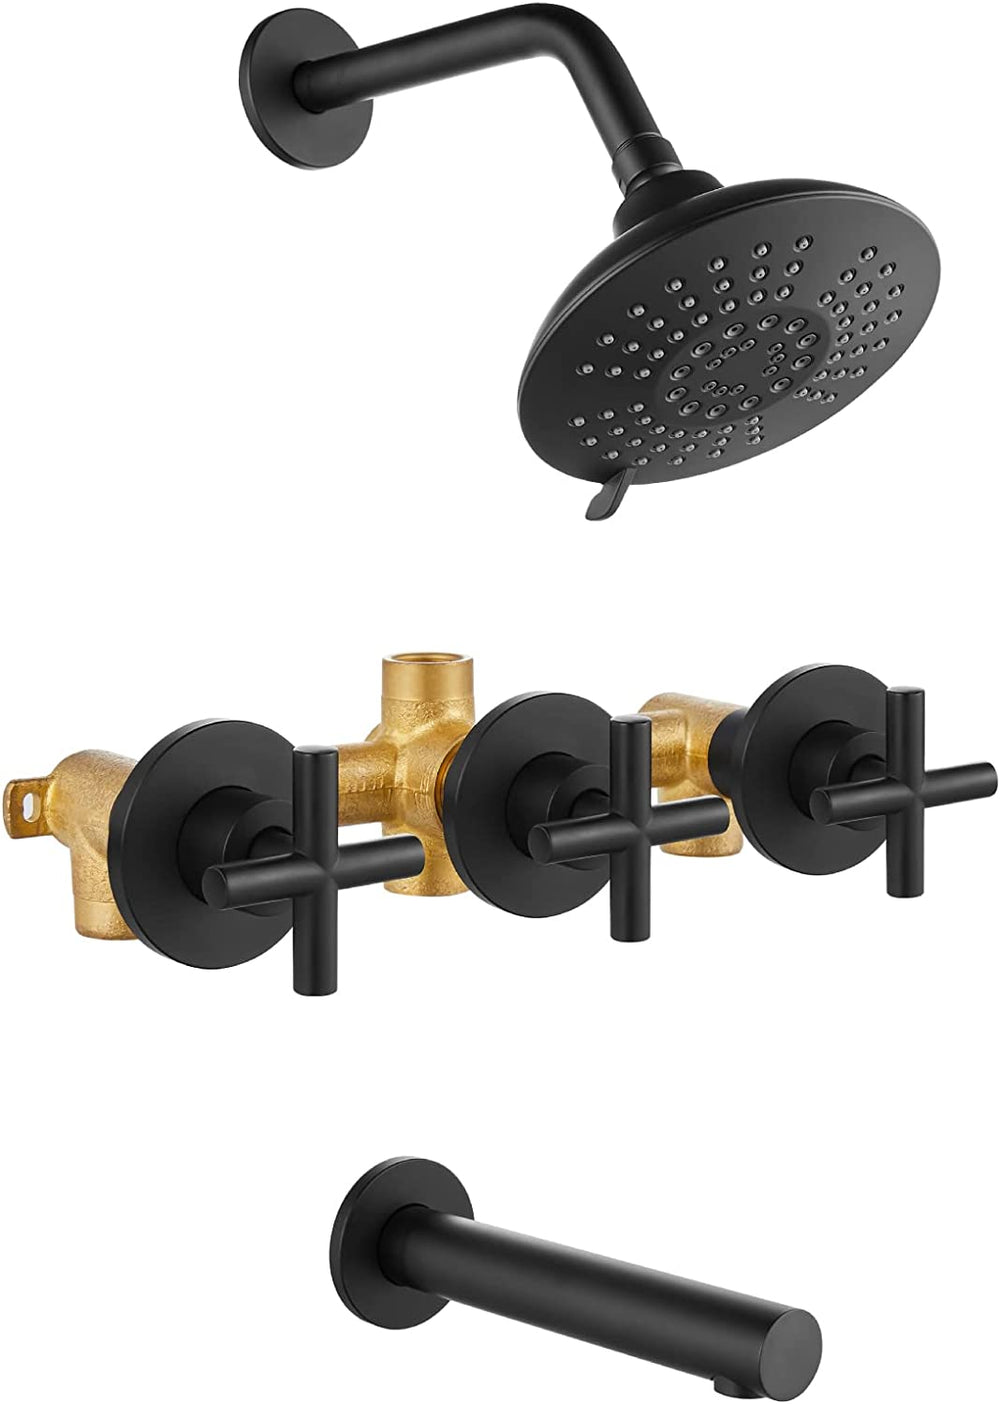 In-Wall Tub and Shower - Stick Handle; with 3-Setting Shower Head Ceramic  Valve System in Chrome 26575